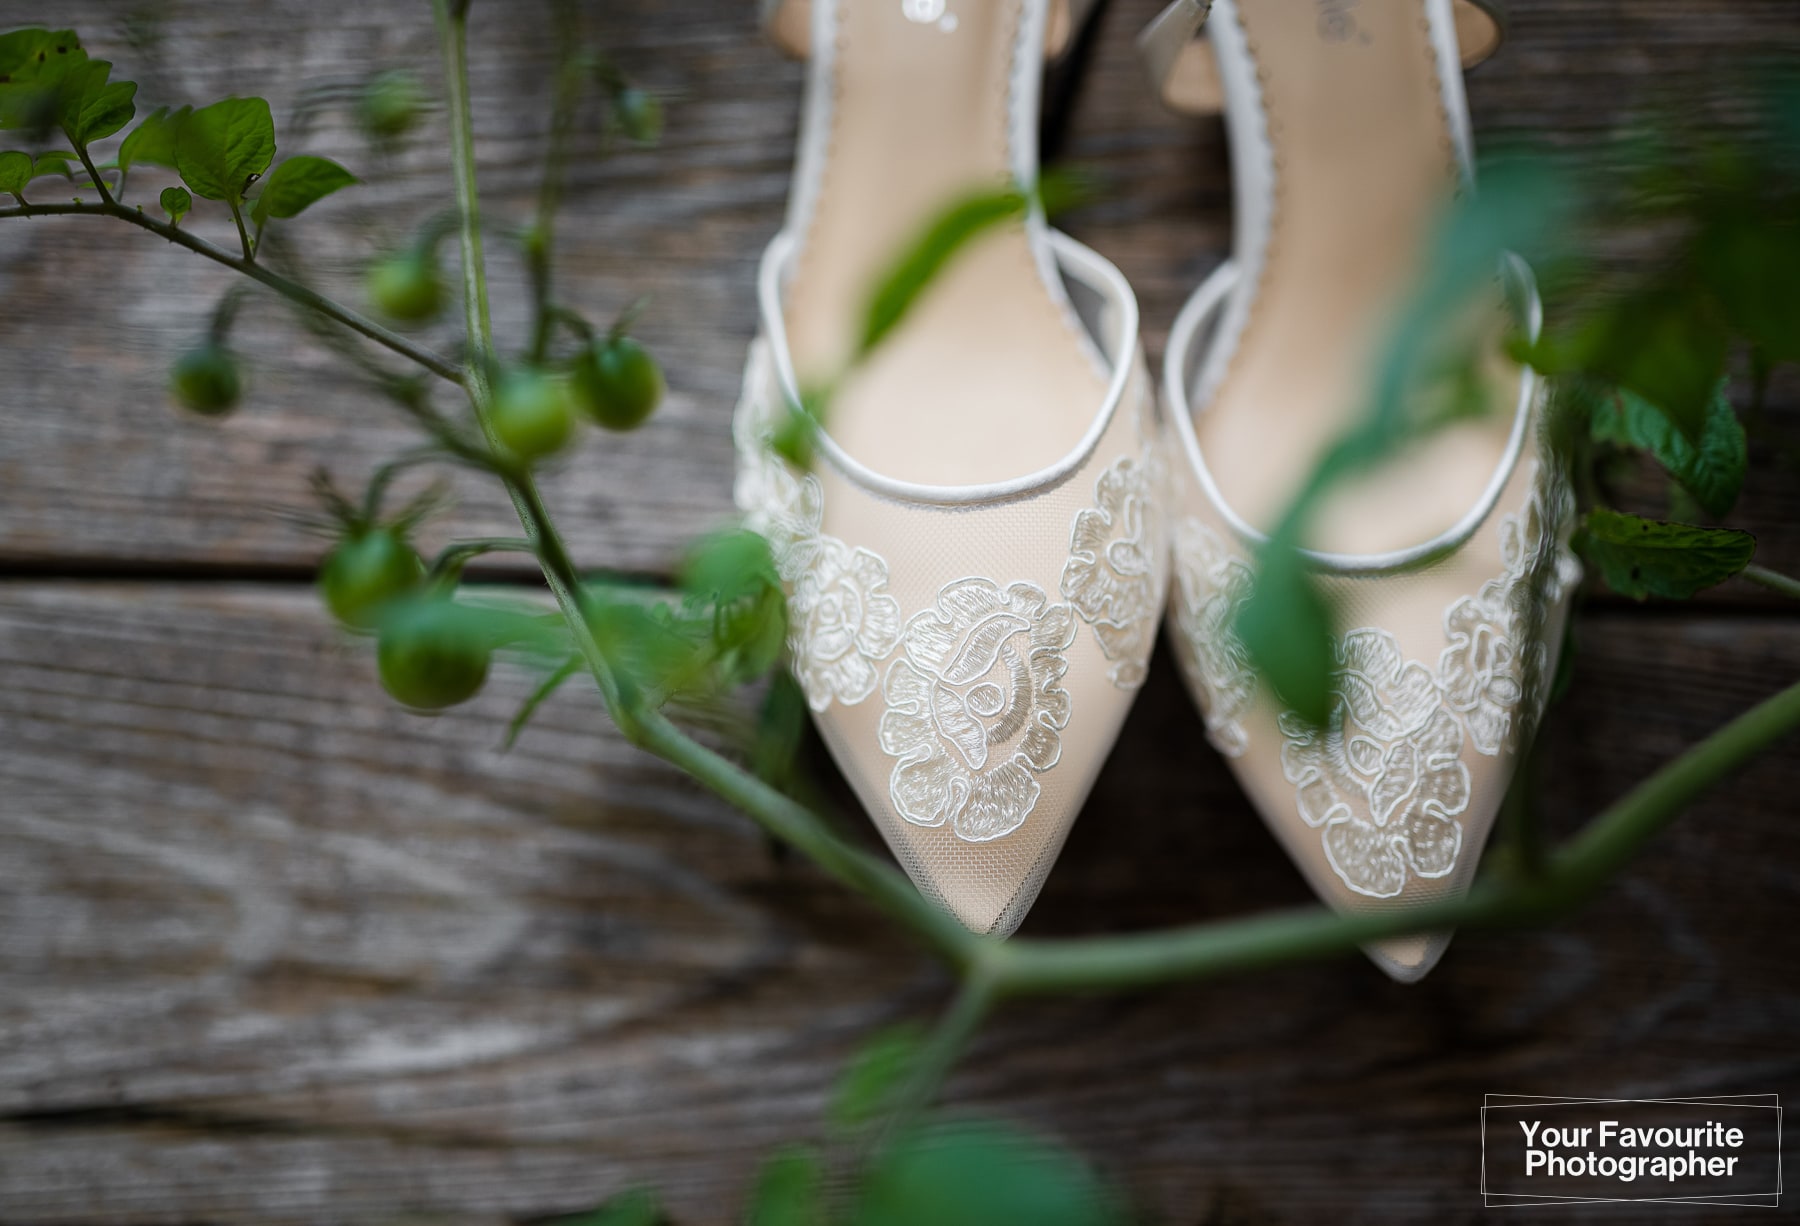 Lace wedding shoes in the garden